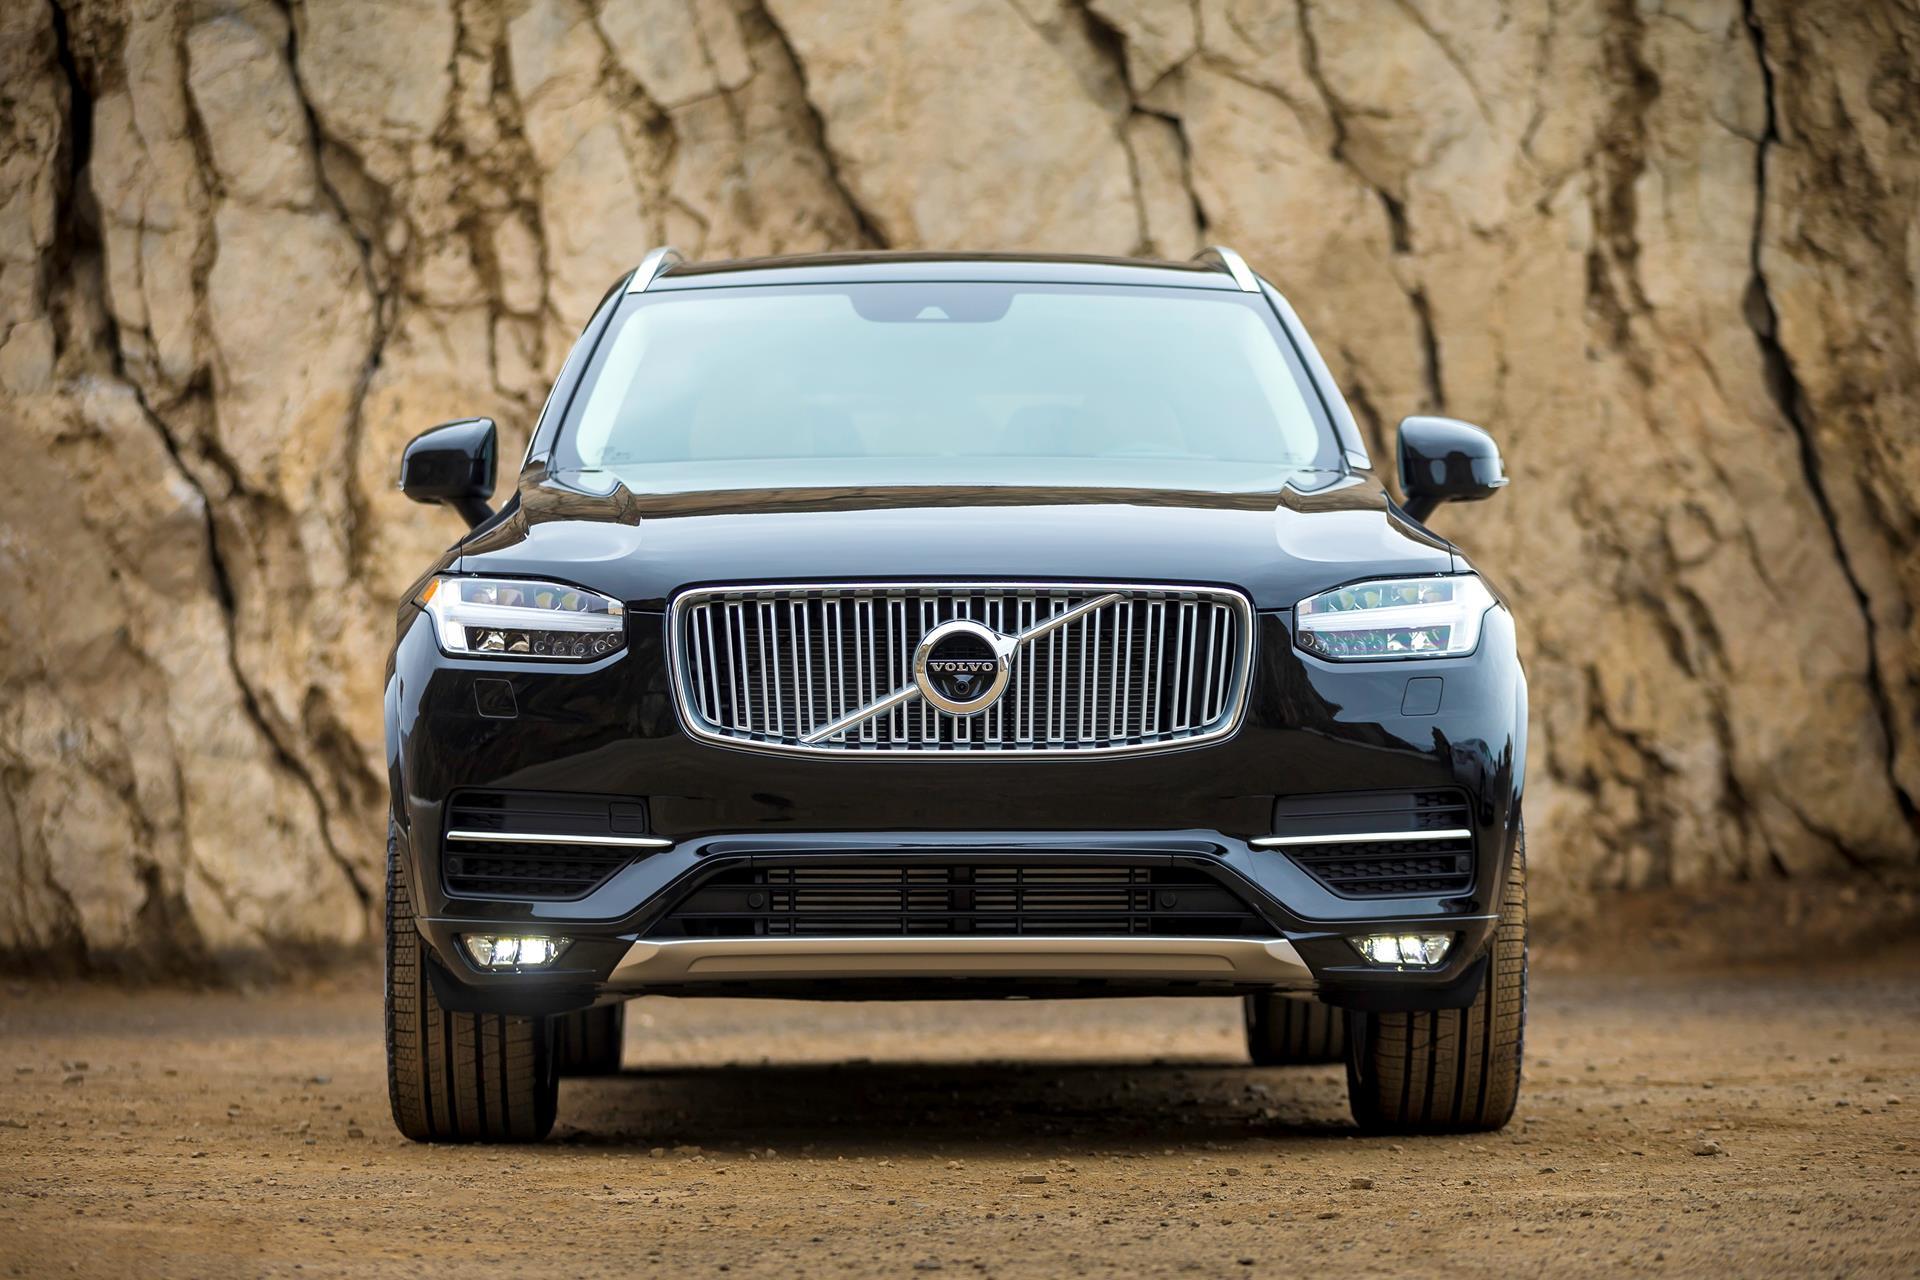 Volvo Xc90 Wallpapers